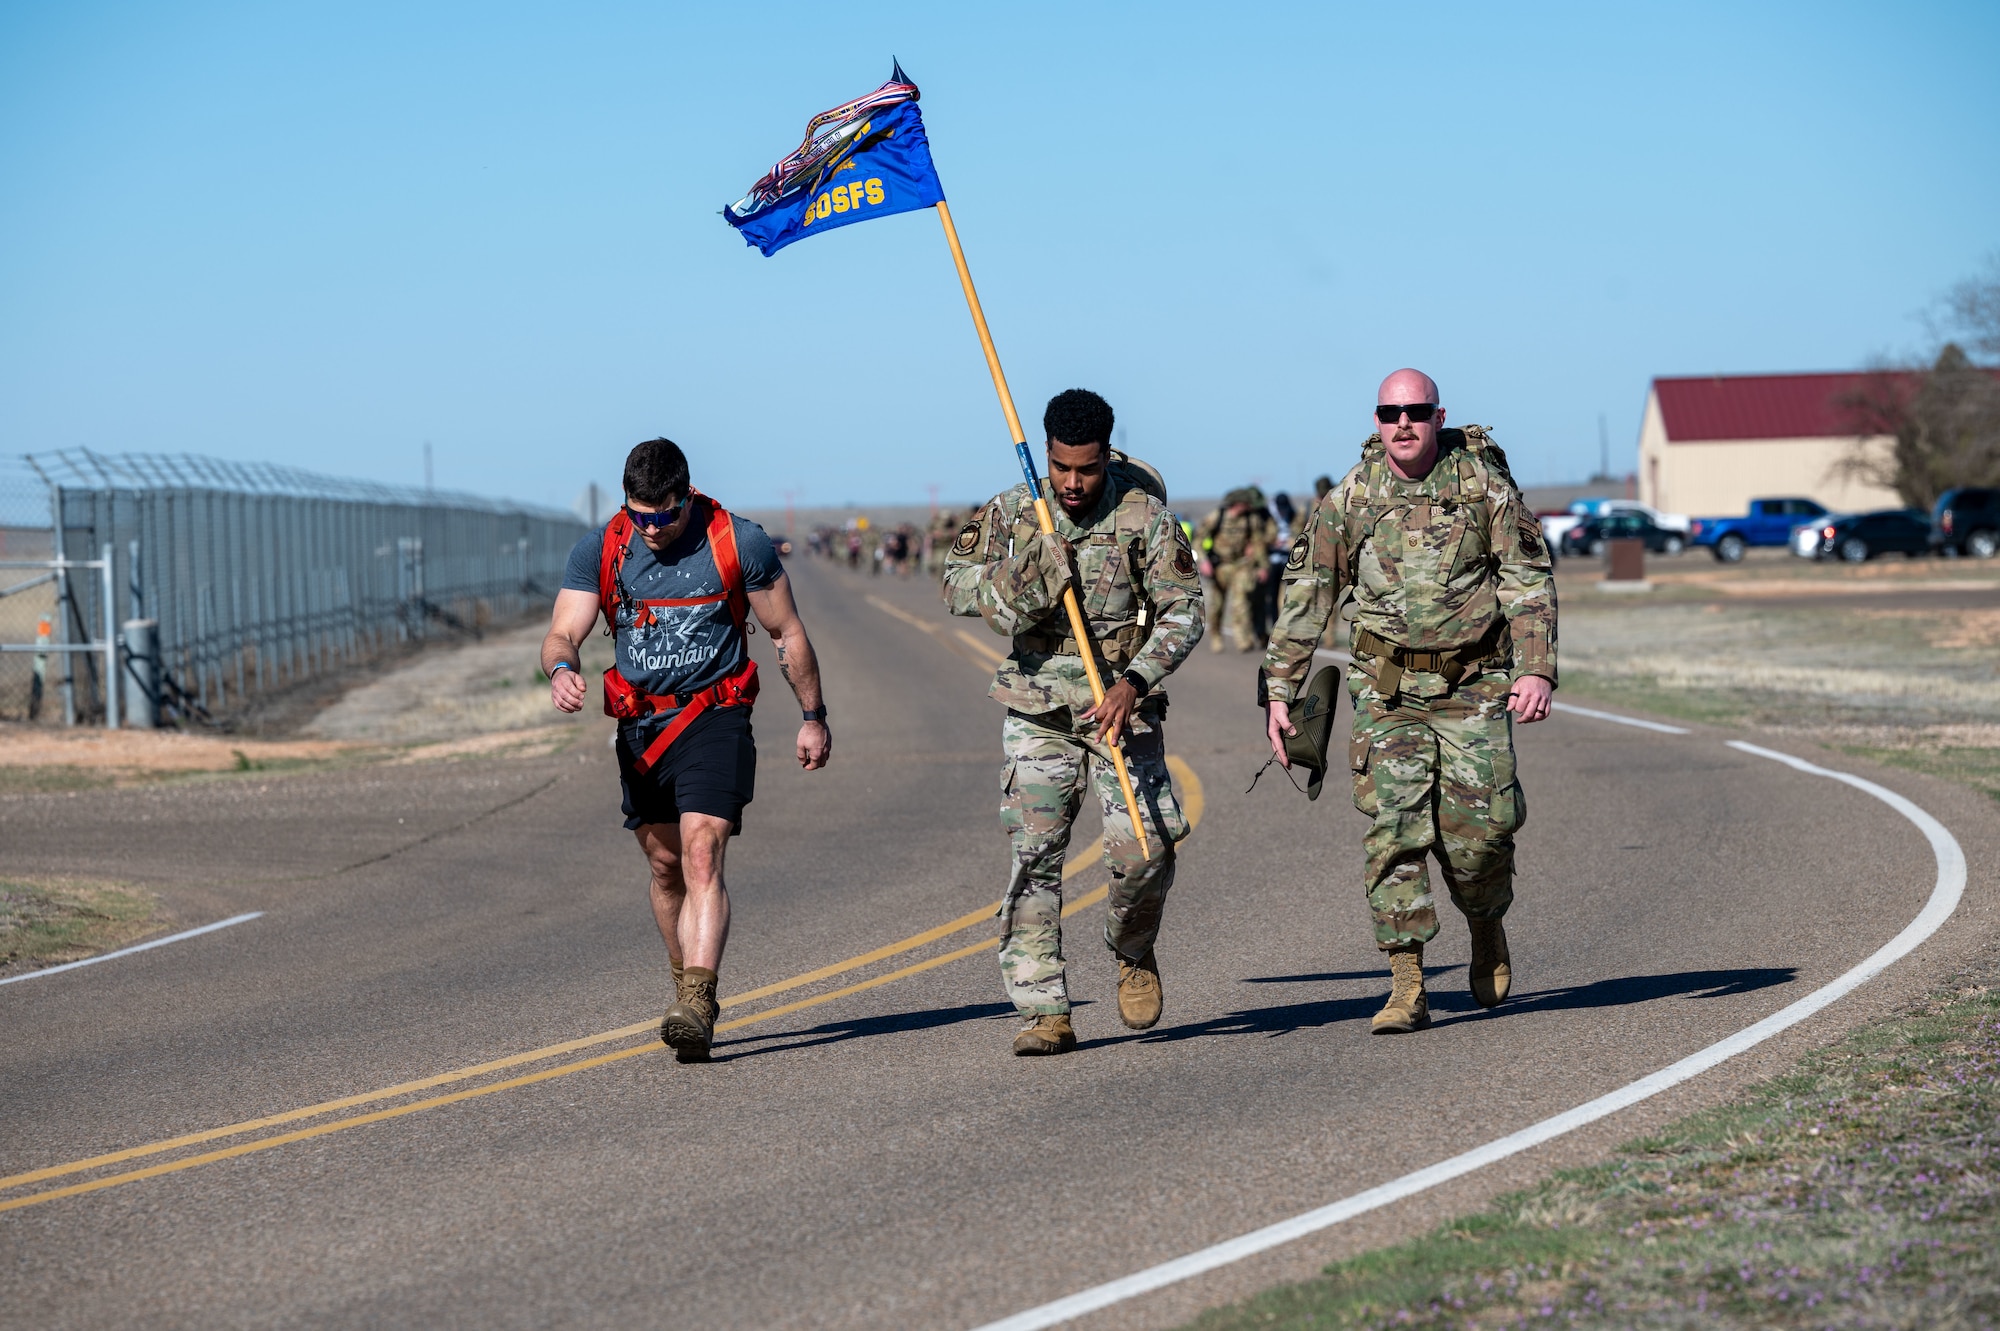 U.S. Air Force Staff Sgt. Anthony Simon, 27th Special Operations Security Forces Squadron quality control evaluator, carries the 27 SOSFS guidon during the 3rd Annual Steadfast Ruck March at Cannon Air Force Base, N.M., March 22, 2024. Members from the local community waited at the finish line during the event and experienced what it means to be part of The Steadfast Line. (U.S. Air Force photo by 2nd Lt. Charles Moye)